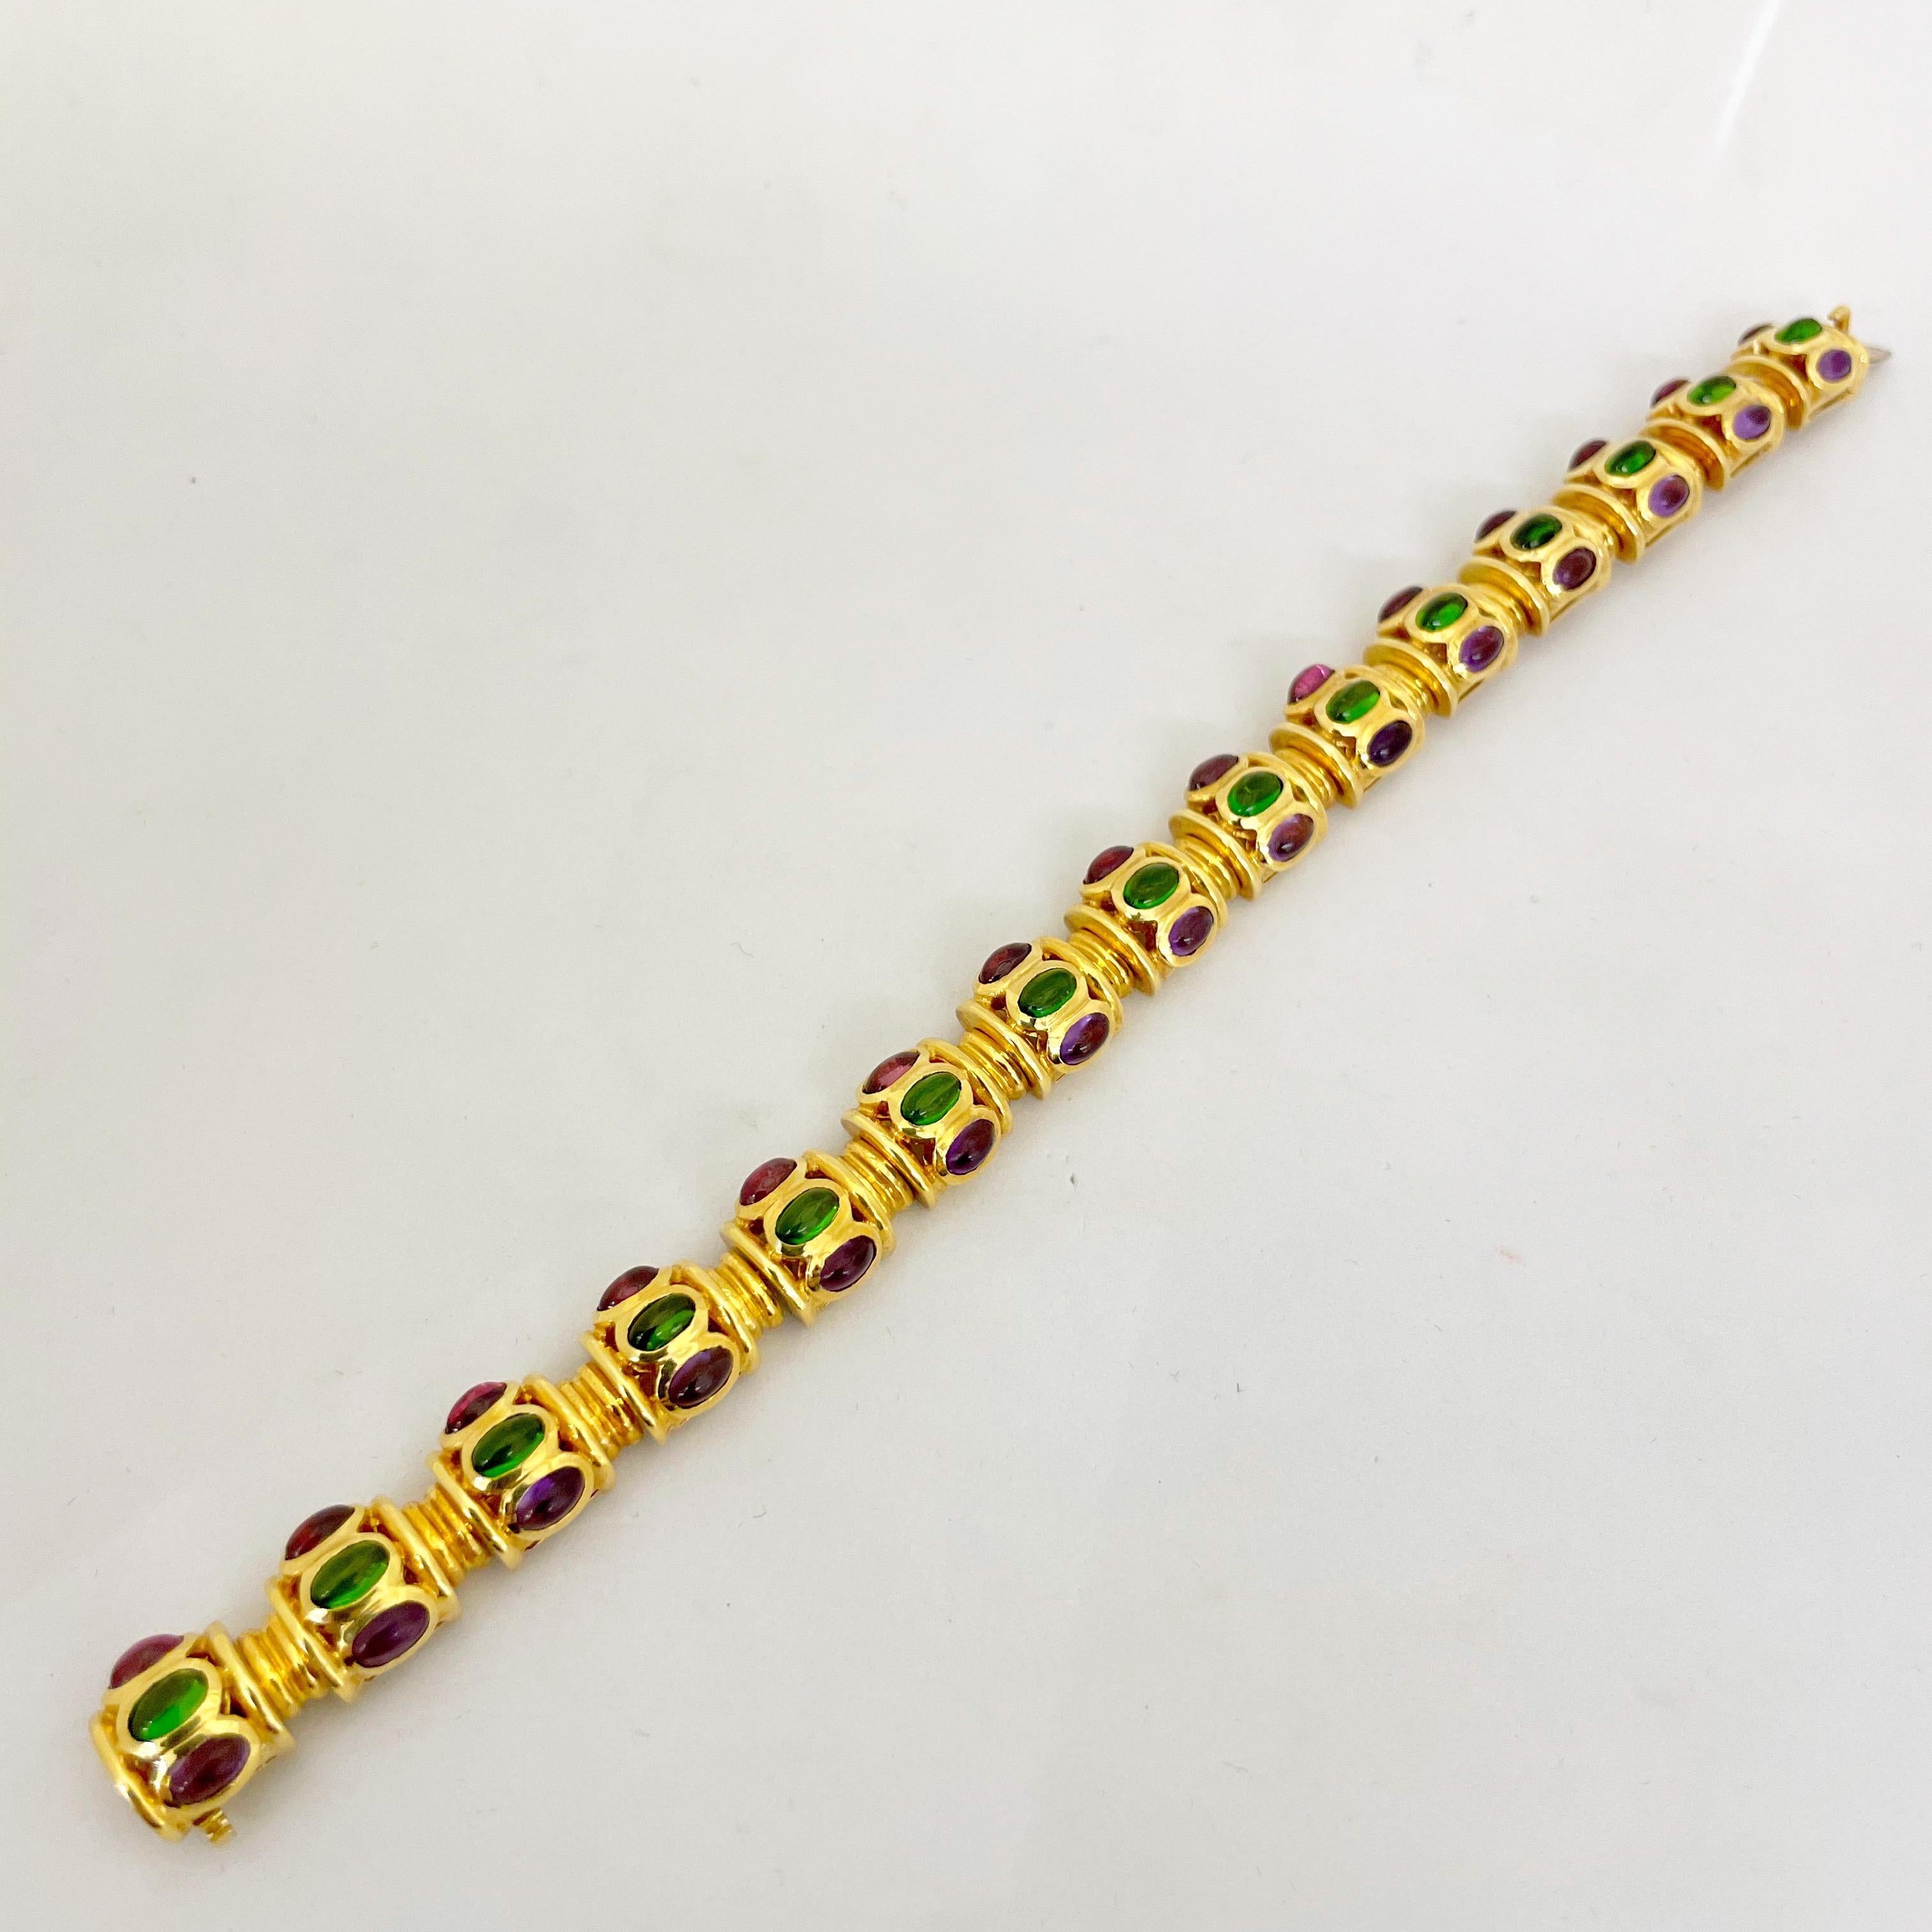 A beautifully designed 18 karat yellow gold link bracelet. the bracelet is composed of 15 barrel shaped links each set with oval cabochons of amethyst,diopside and rhodoite. When the 7-1/8